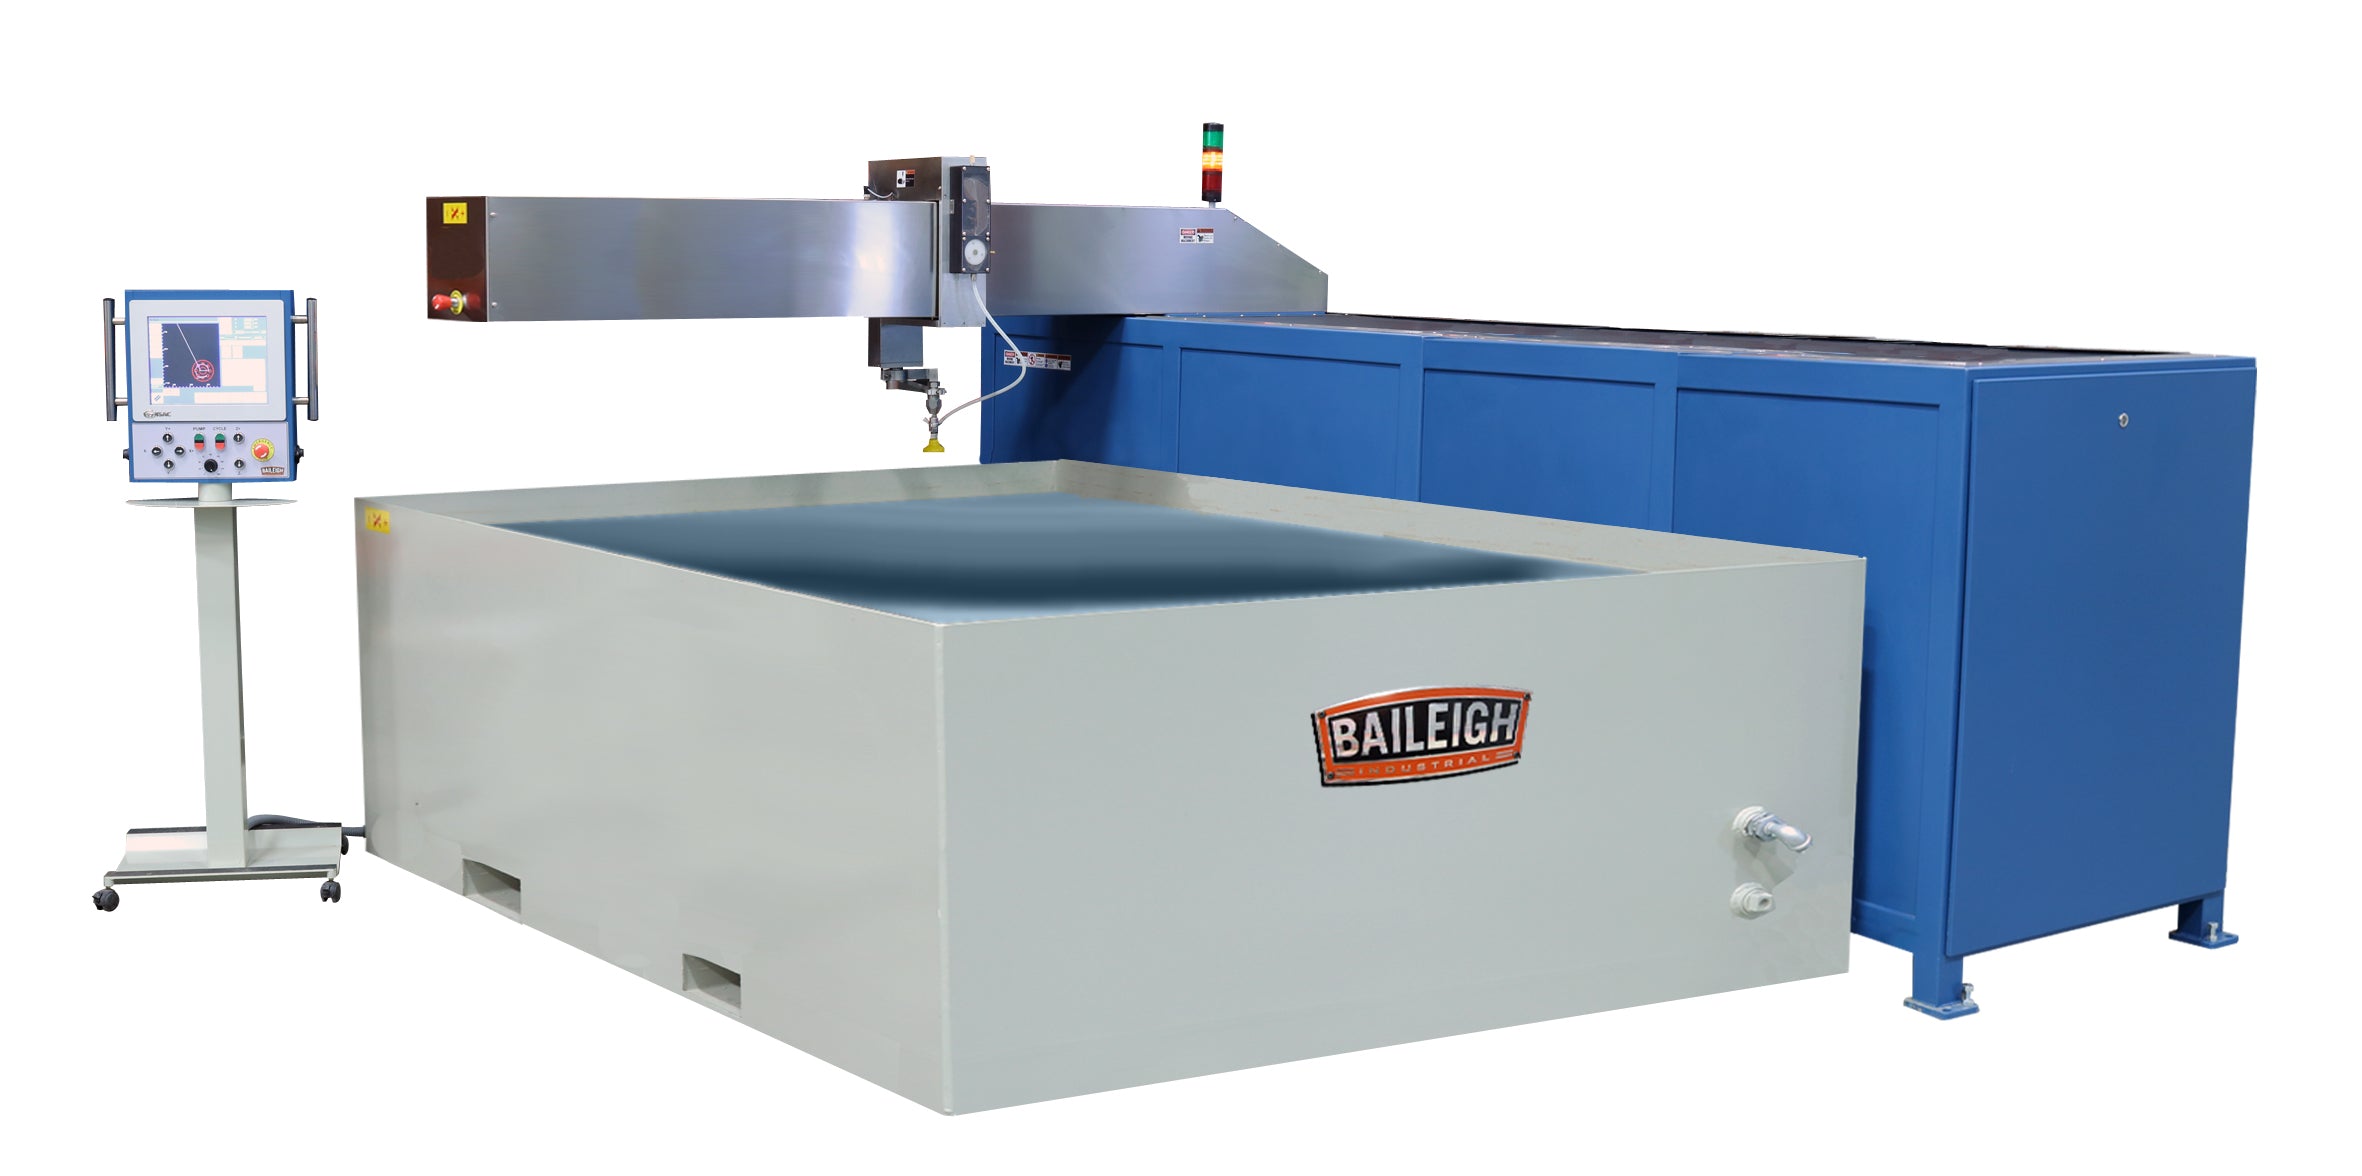 Baileigh WJ-512CNC 460V 3 Phase 60 Htz 60" x 144" 3 axis CNC Flying Arm Water Jet with Direct Drive Pump